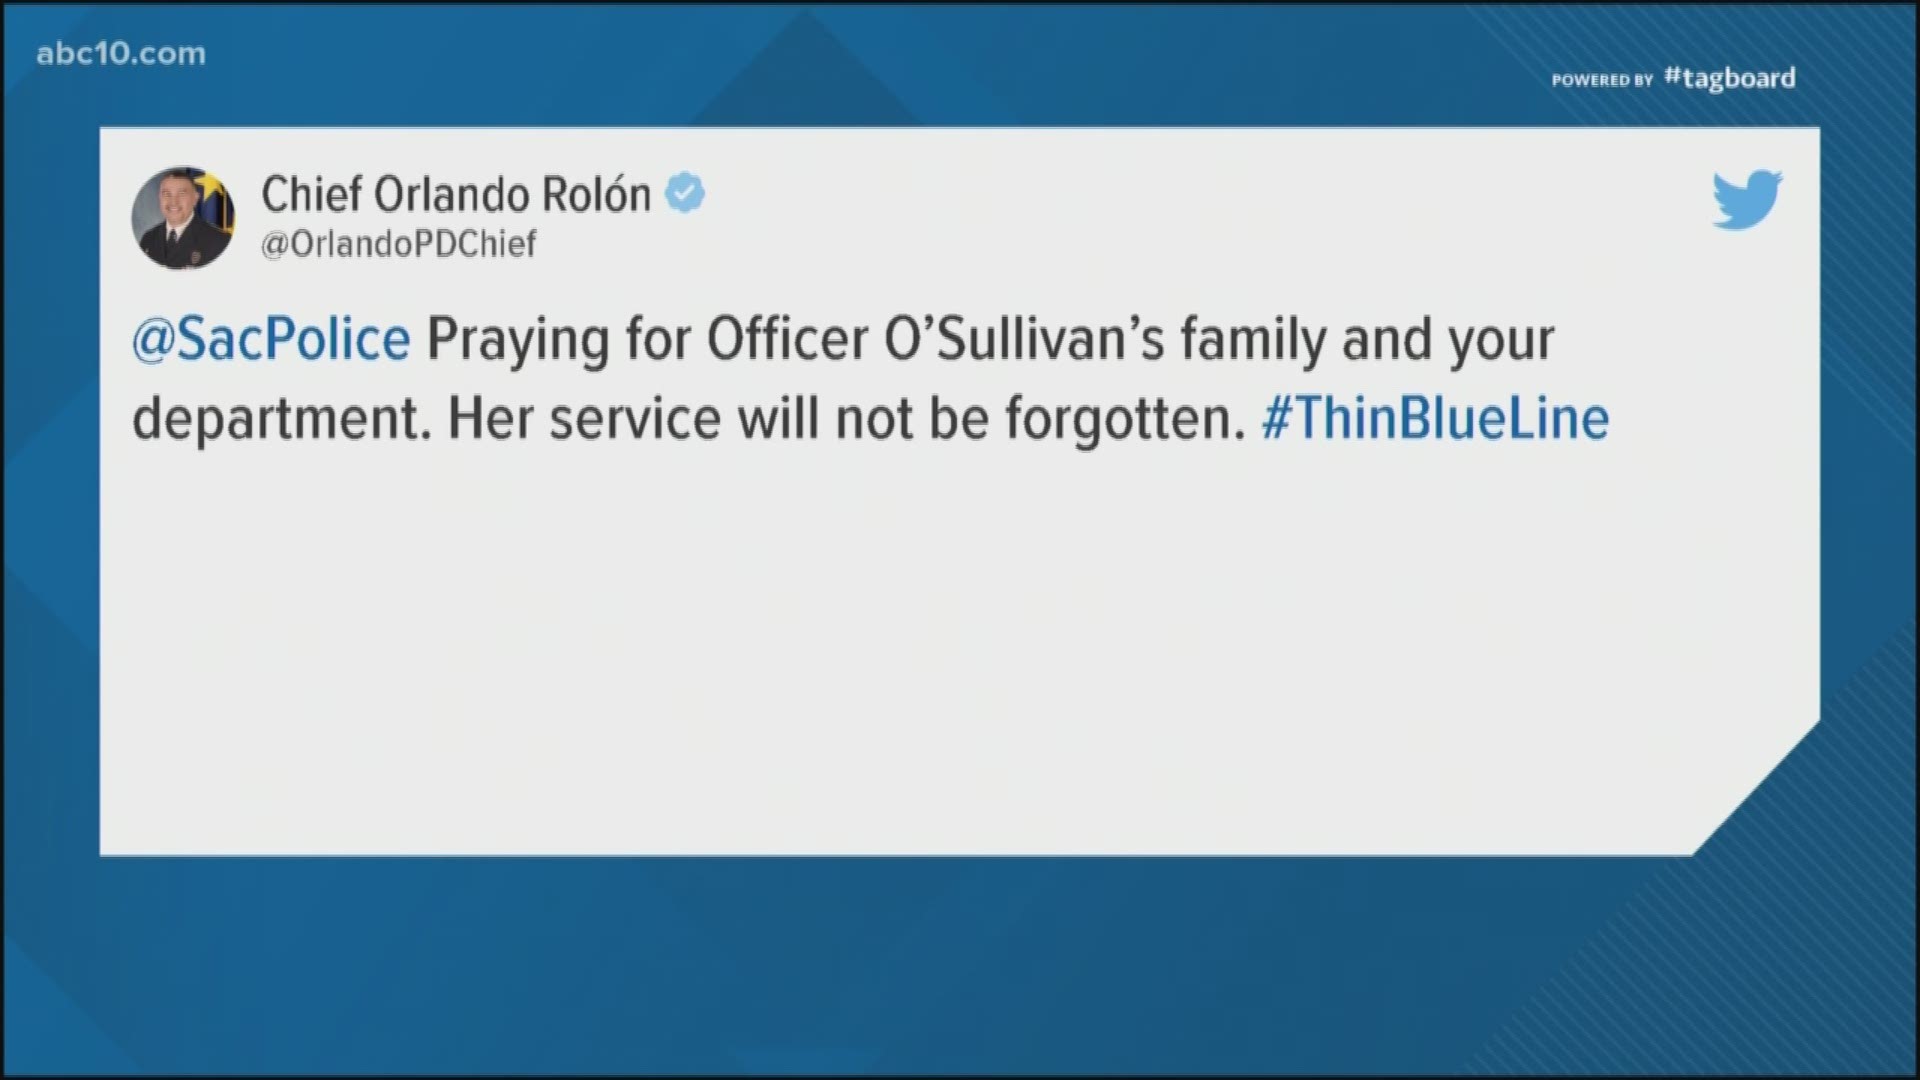 Departments from New York to Florida have reached out with condolences to the Sacramento Police Department after the shooting death of Officer O'Sullivan.